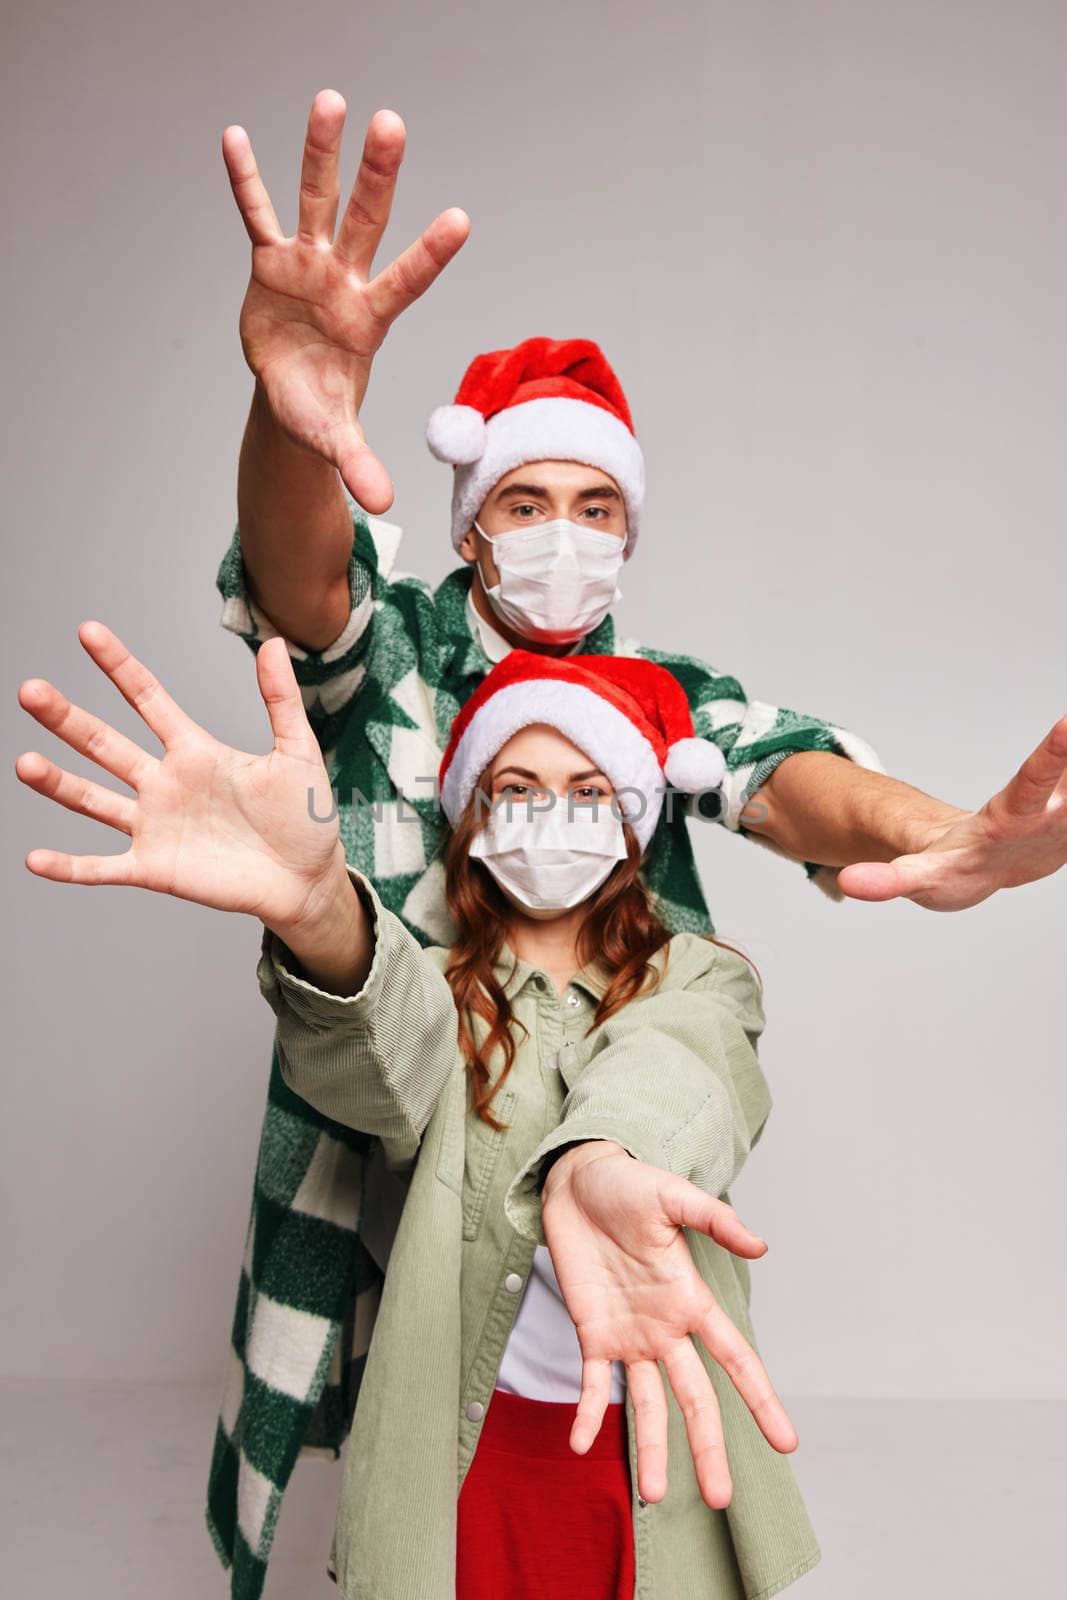 Gesturing hands holiday New Year medical mask fun by SHOTPRIME